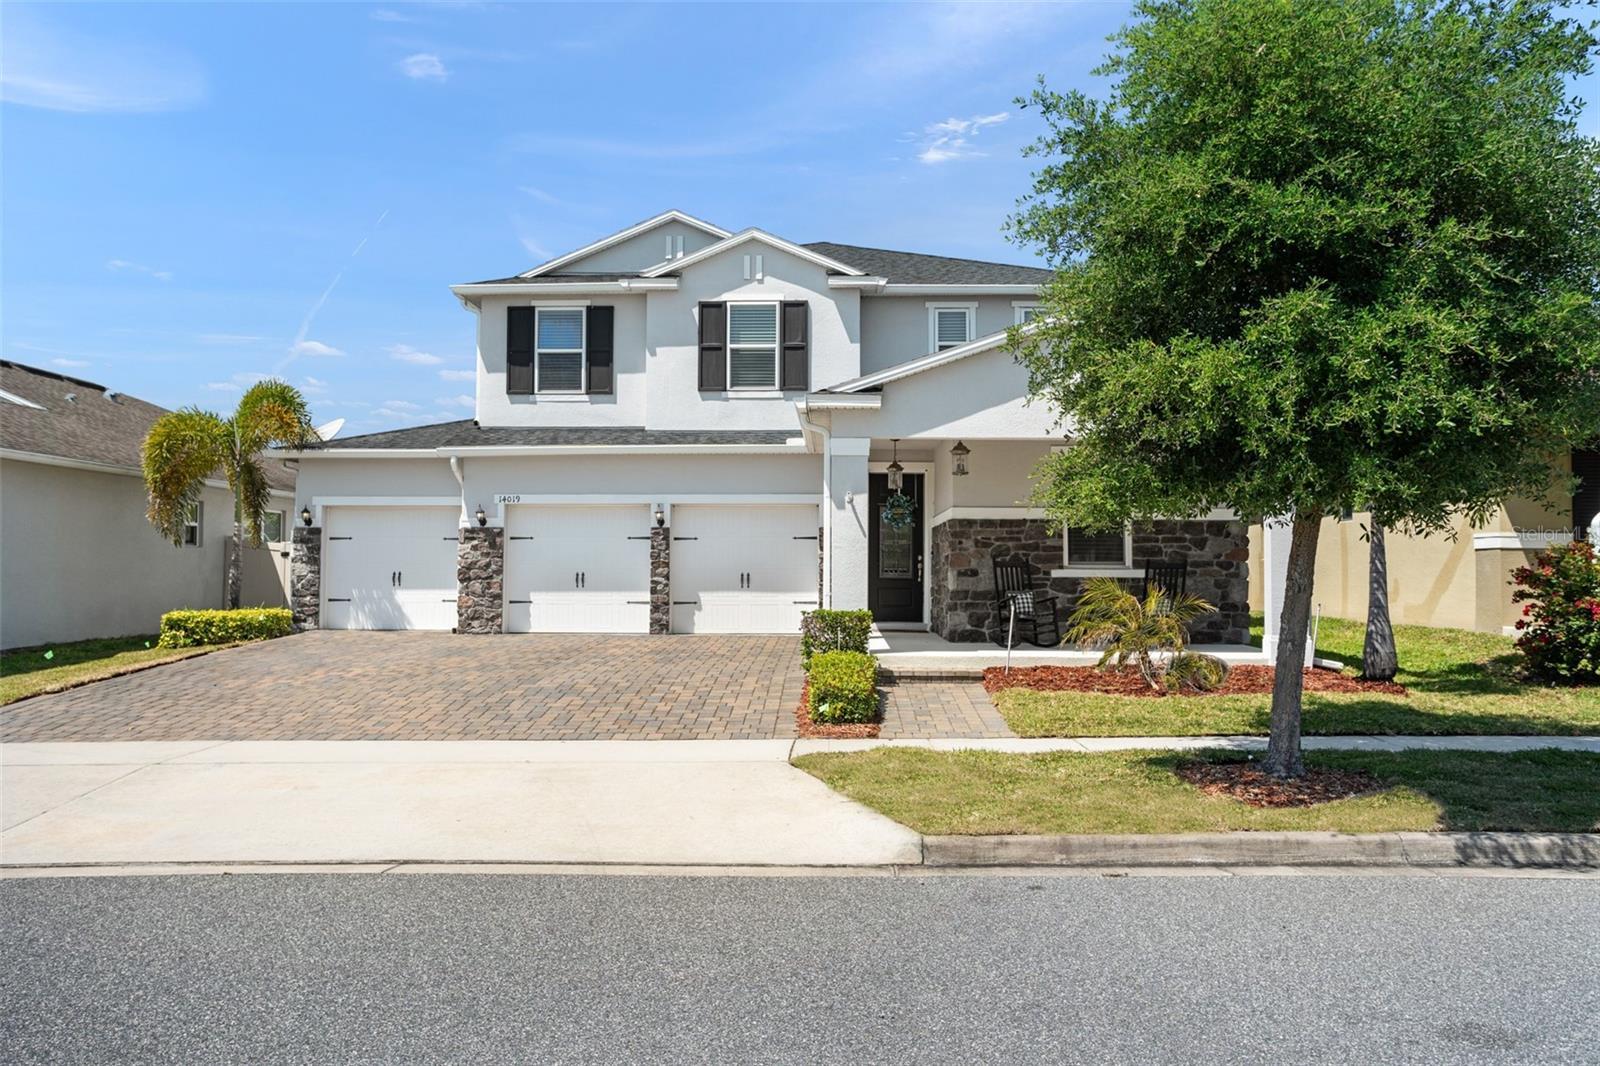 Photo one of 14019 Pecan Orchard Dr Winter Garden FL 34787 | MLS O6197199